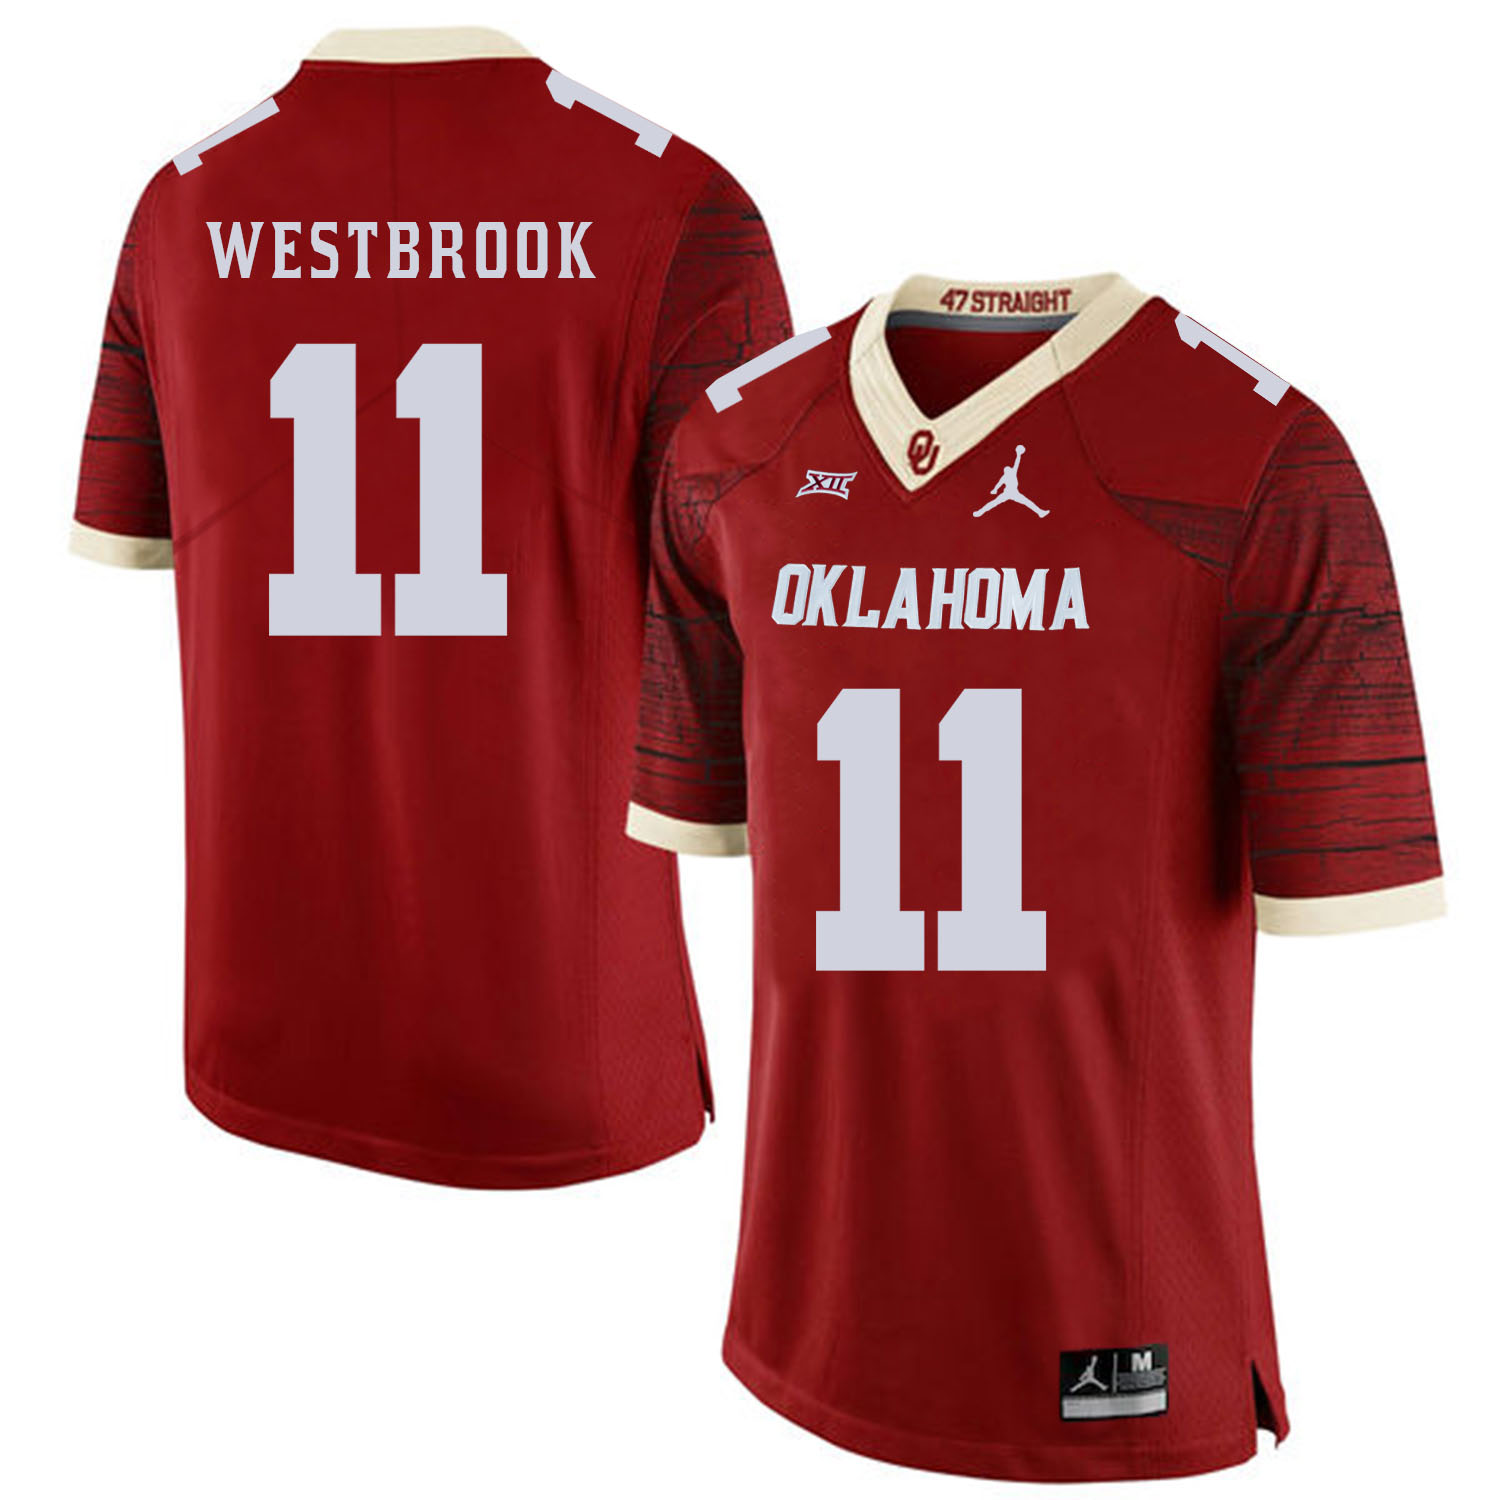 Oklahoma Sooners 11 Dede Westbrook Red 47 Game Winning Streak College Football Jersey - Click Image to Close